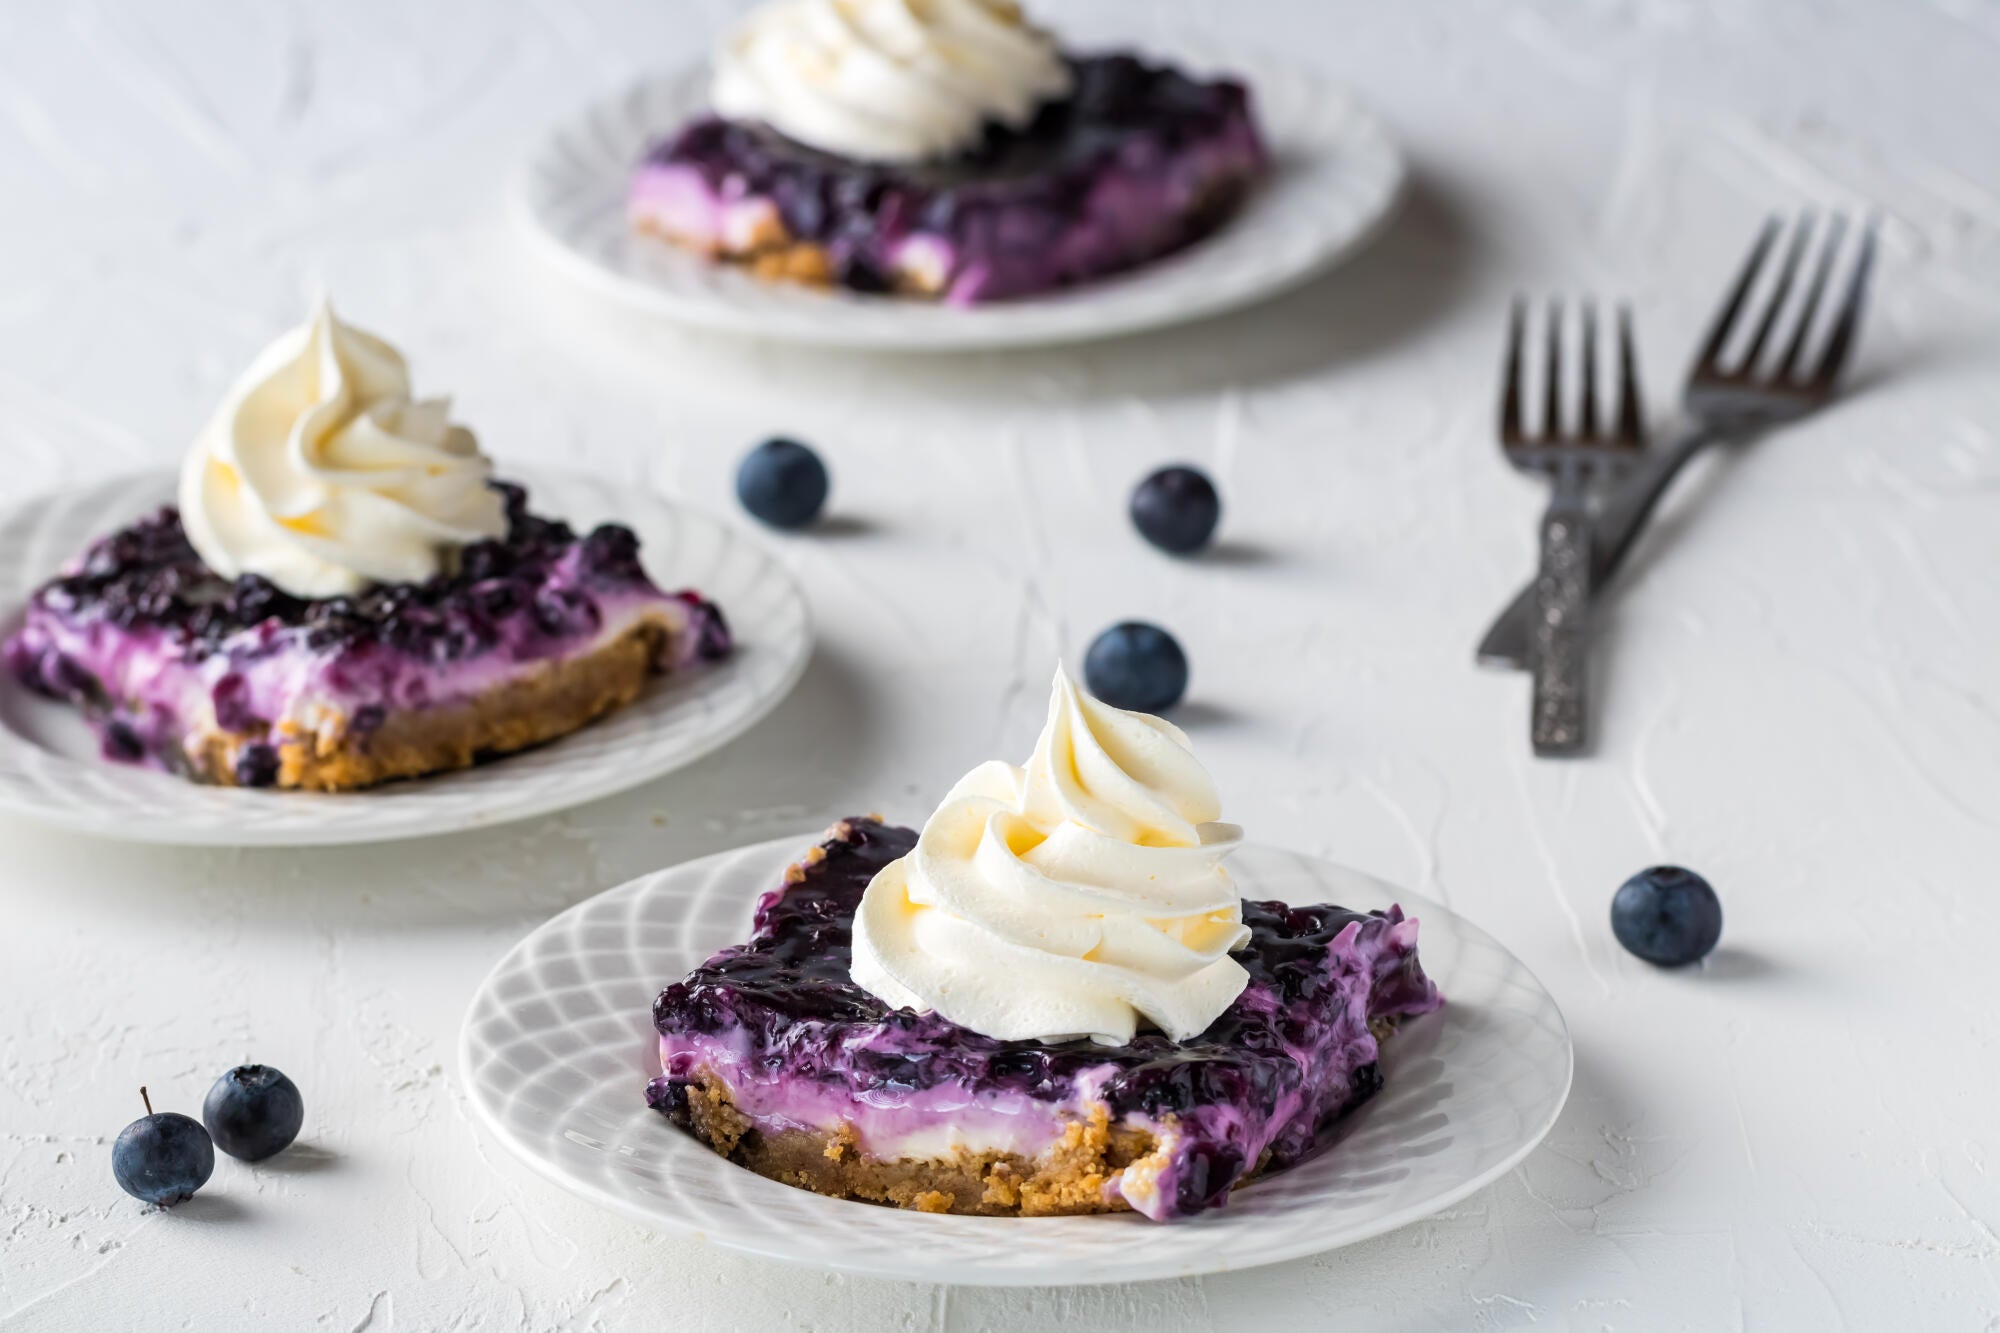 Mouthwateringly Good: How to Make Blueberry Cheesecake Bars